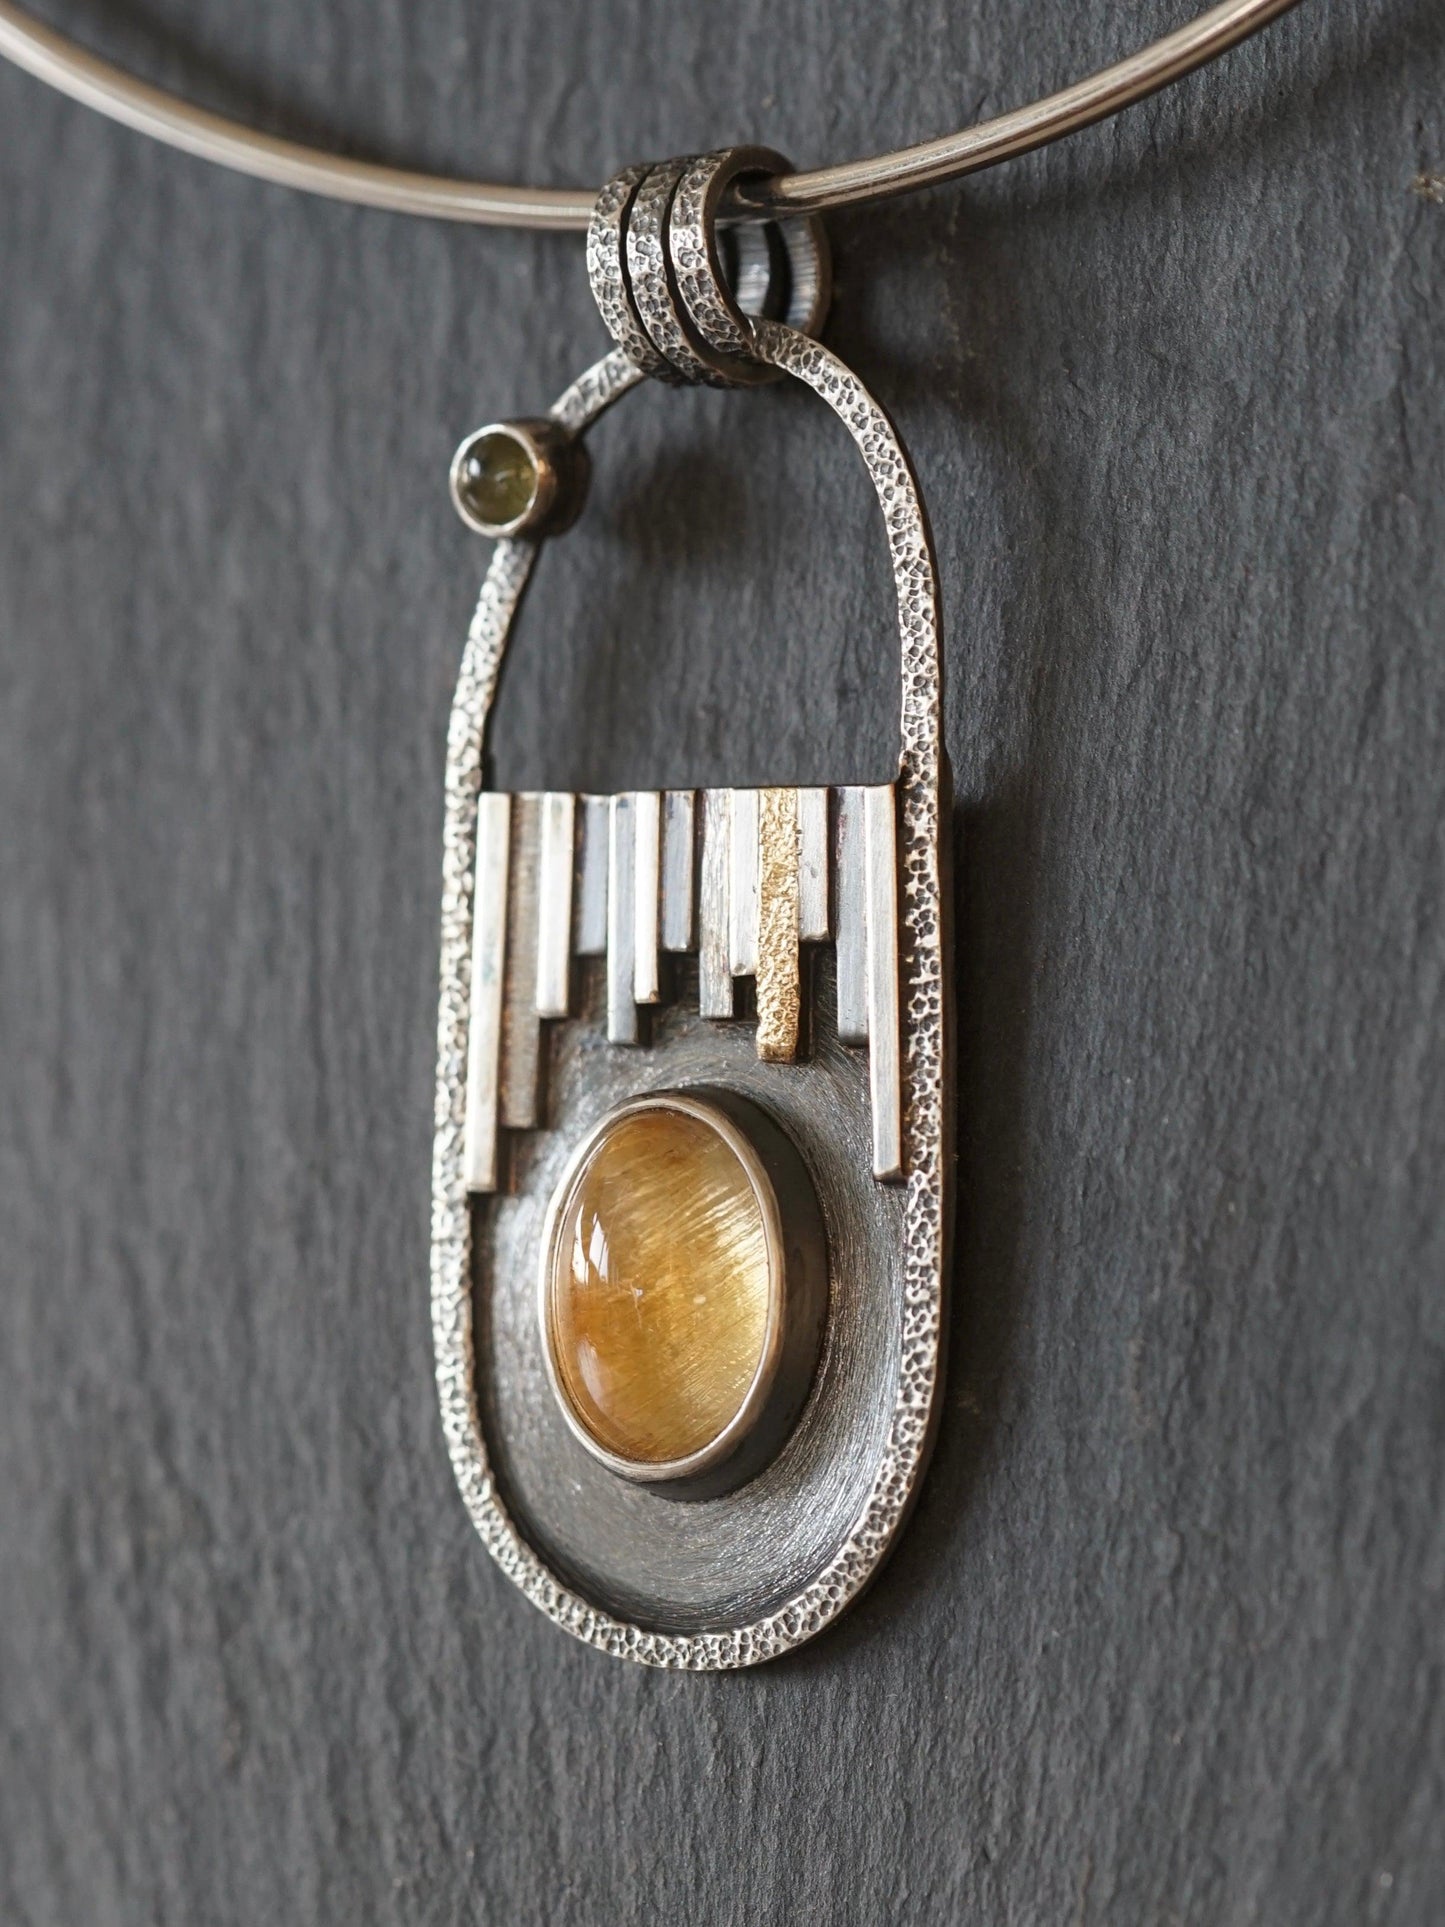 Reserved for Emily, Citrine and Tourmaline pendant with 22k gold accents